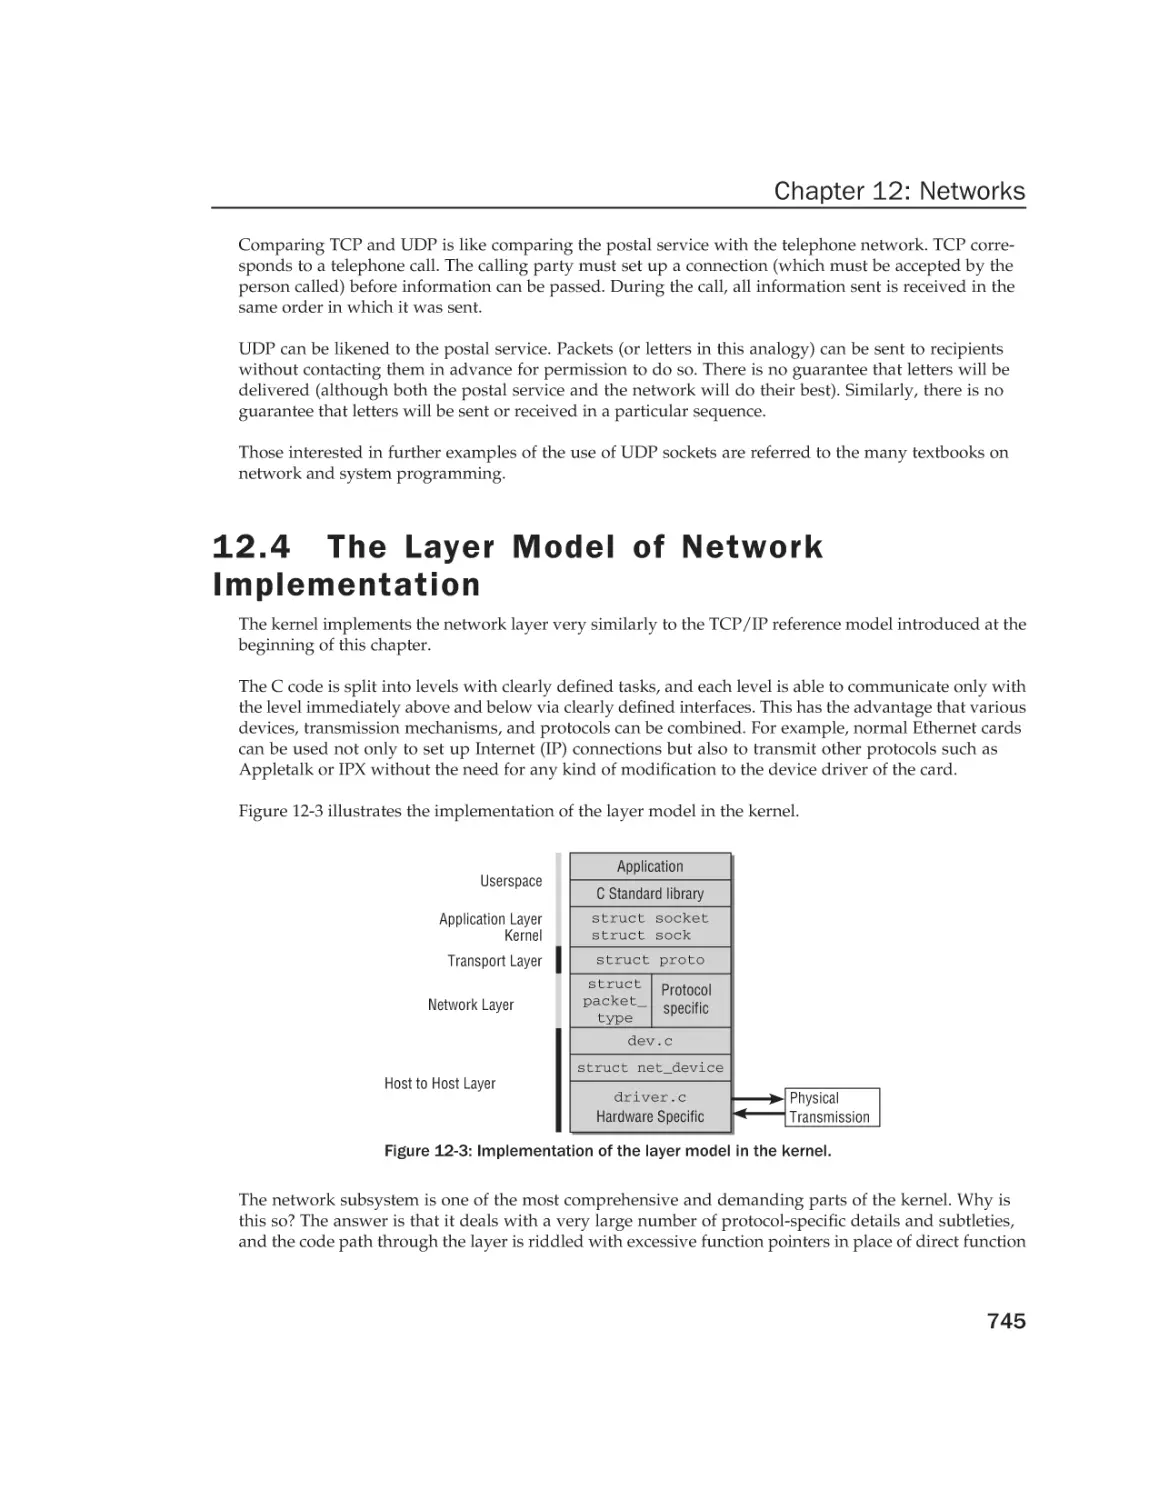 12.4 The Layer Model of Network Implementation